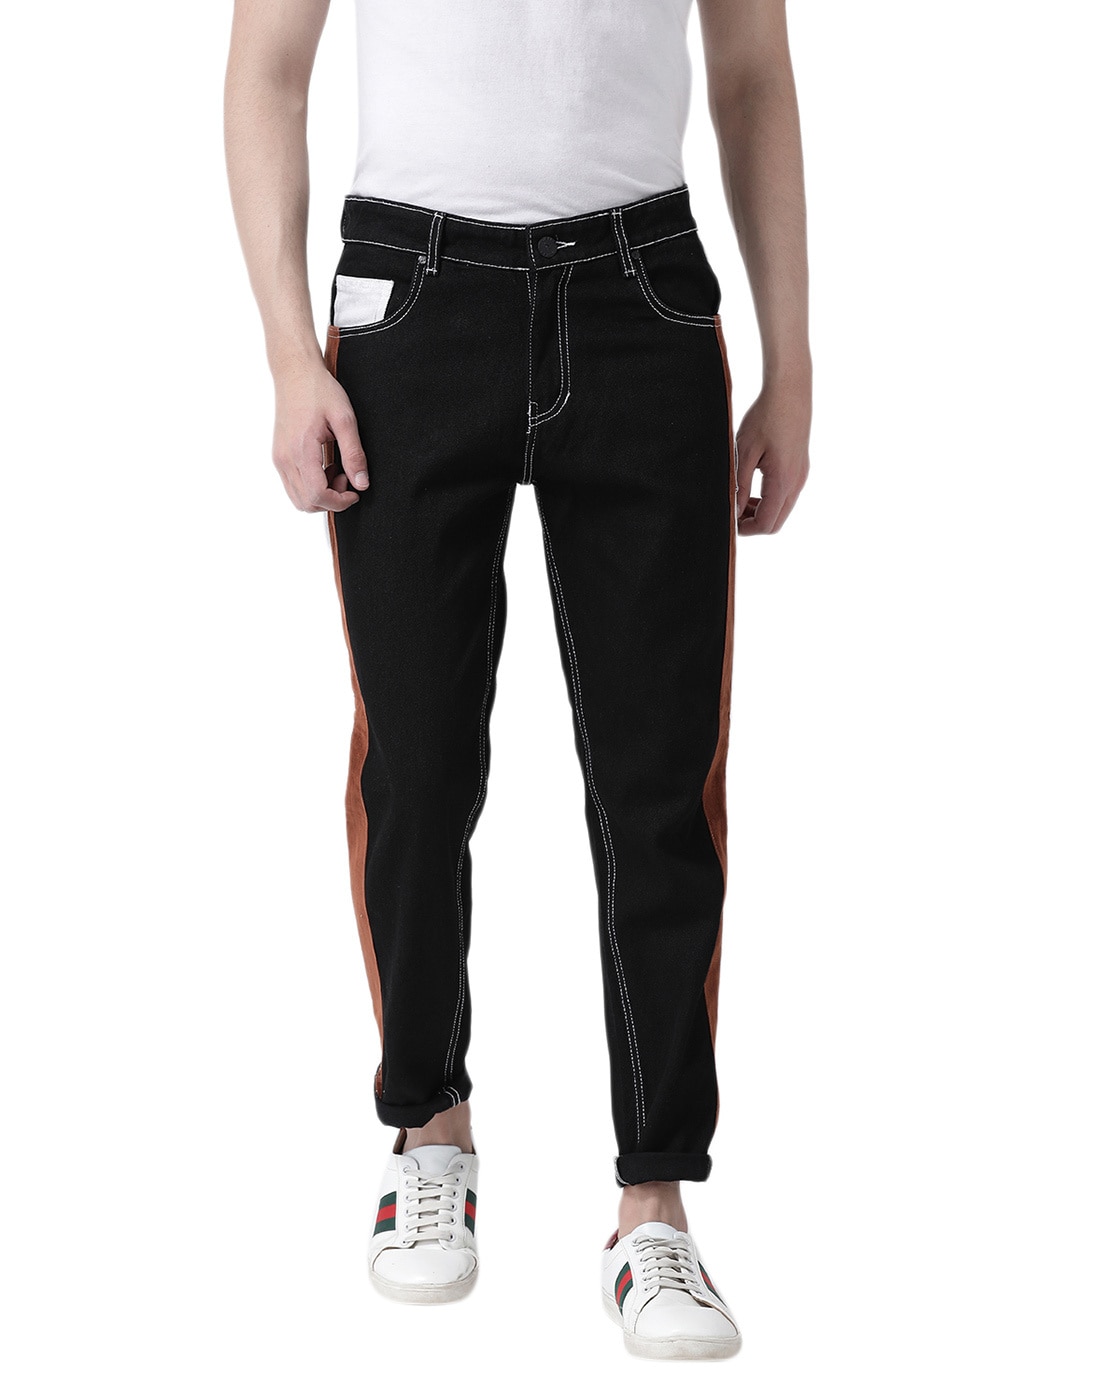 Buy Black Jeans for Men by Realm Online Ajio.com